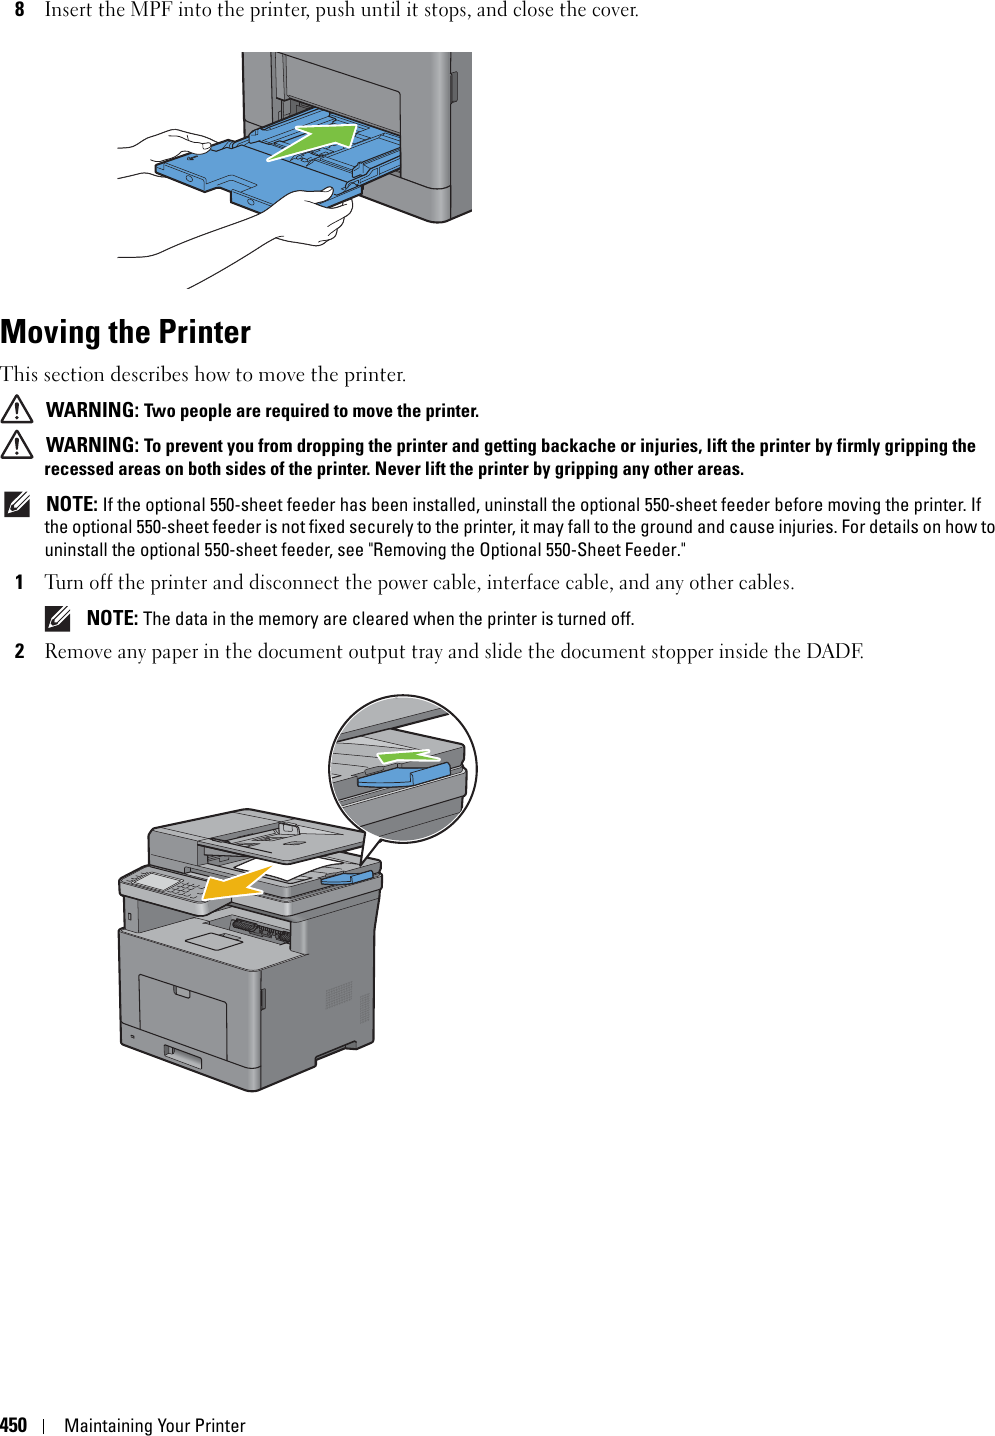 450Maintaining Your Printer8Insert the MPF into the printer, push until it stops, and close the cover.Moving the PrinterThis section describes how to move the printer. WARNING: Two people are required to move the printer. WARNING: To prevent you from dropping the printer and getting backache or injuries, lift the printer by firmly gripping the recessed areas on both sides of the printer. Never lift the printer by gripping any other areas. NOTE: If the optional 550-sheet feeder has been installed, uninstall the optional 550-sheet feeder before moving the printer. If the optional 550-sheet feeder is not fixed securely to the printer, it may fall to the ground and cause injuries. For details on how to uninstall the optional 550-sheet feeder, see &quot;Removing the Optional 550-Sheet Feeder.&quot;1Turn off the printer and disconnect the power cable, interface cable, and any other cables. NOTE: The data in the memory are cleared when the printer is turned off.2Remove any paper in the document output tray and slide the document stopper inside the DADF.